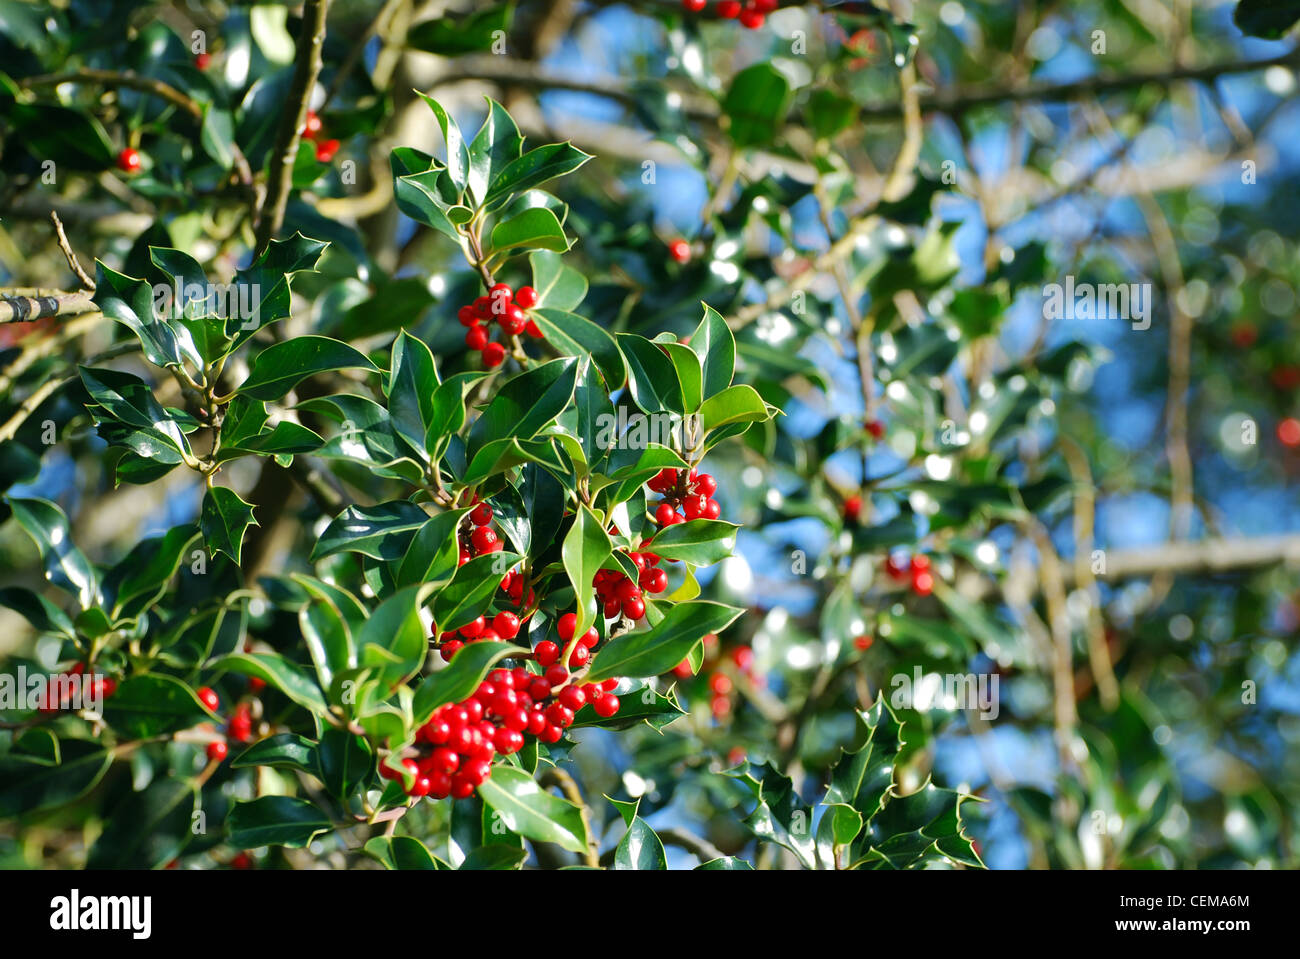 Holly berries on young leaf branches number 3022 Stock Photo